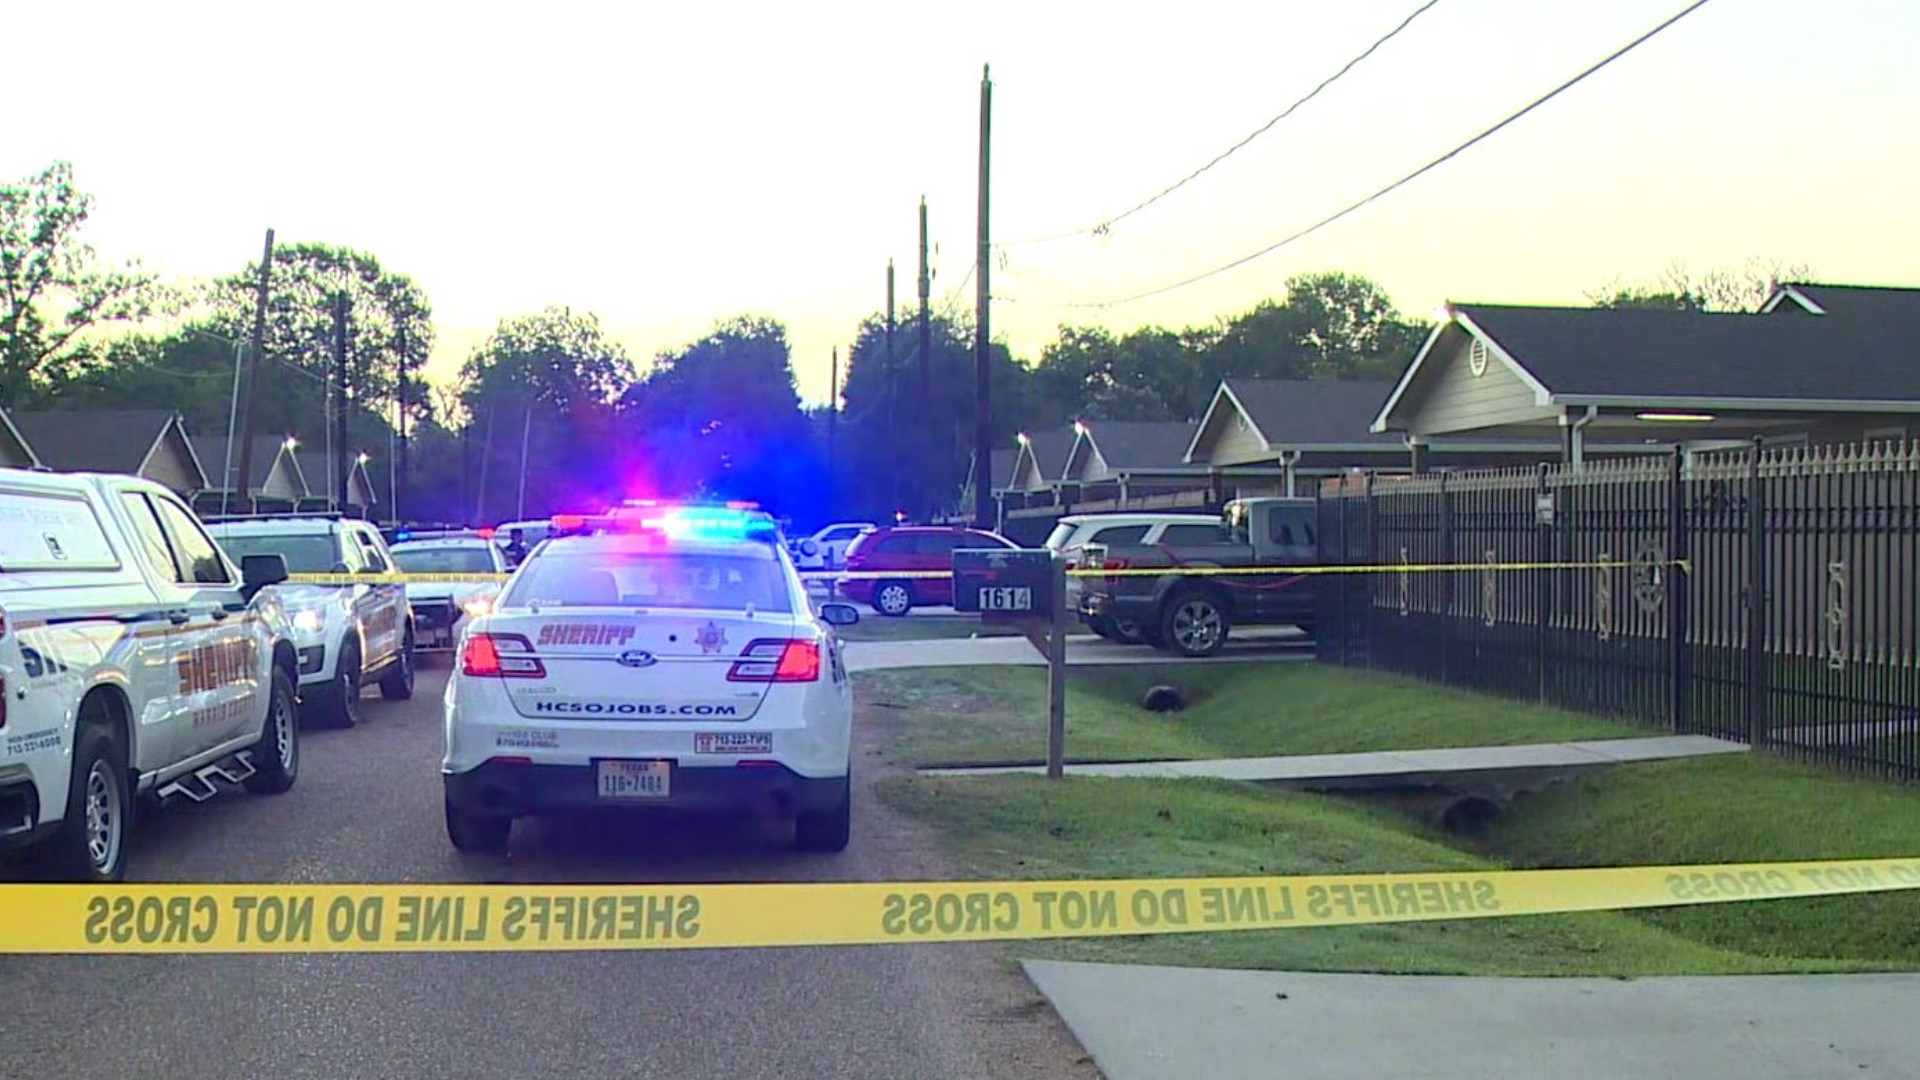 Harris County Sheriff’s Deputies are investigating the circumstances leading up to a deadly shooting reported in a home north of Houston early Friday